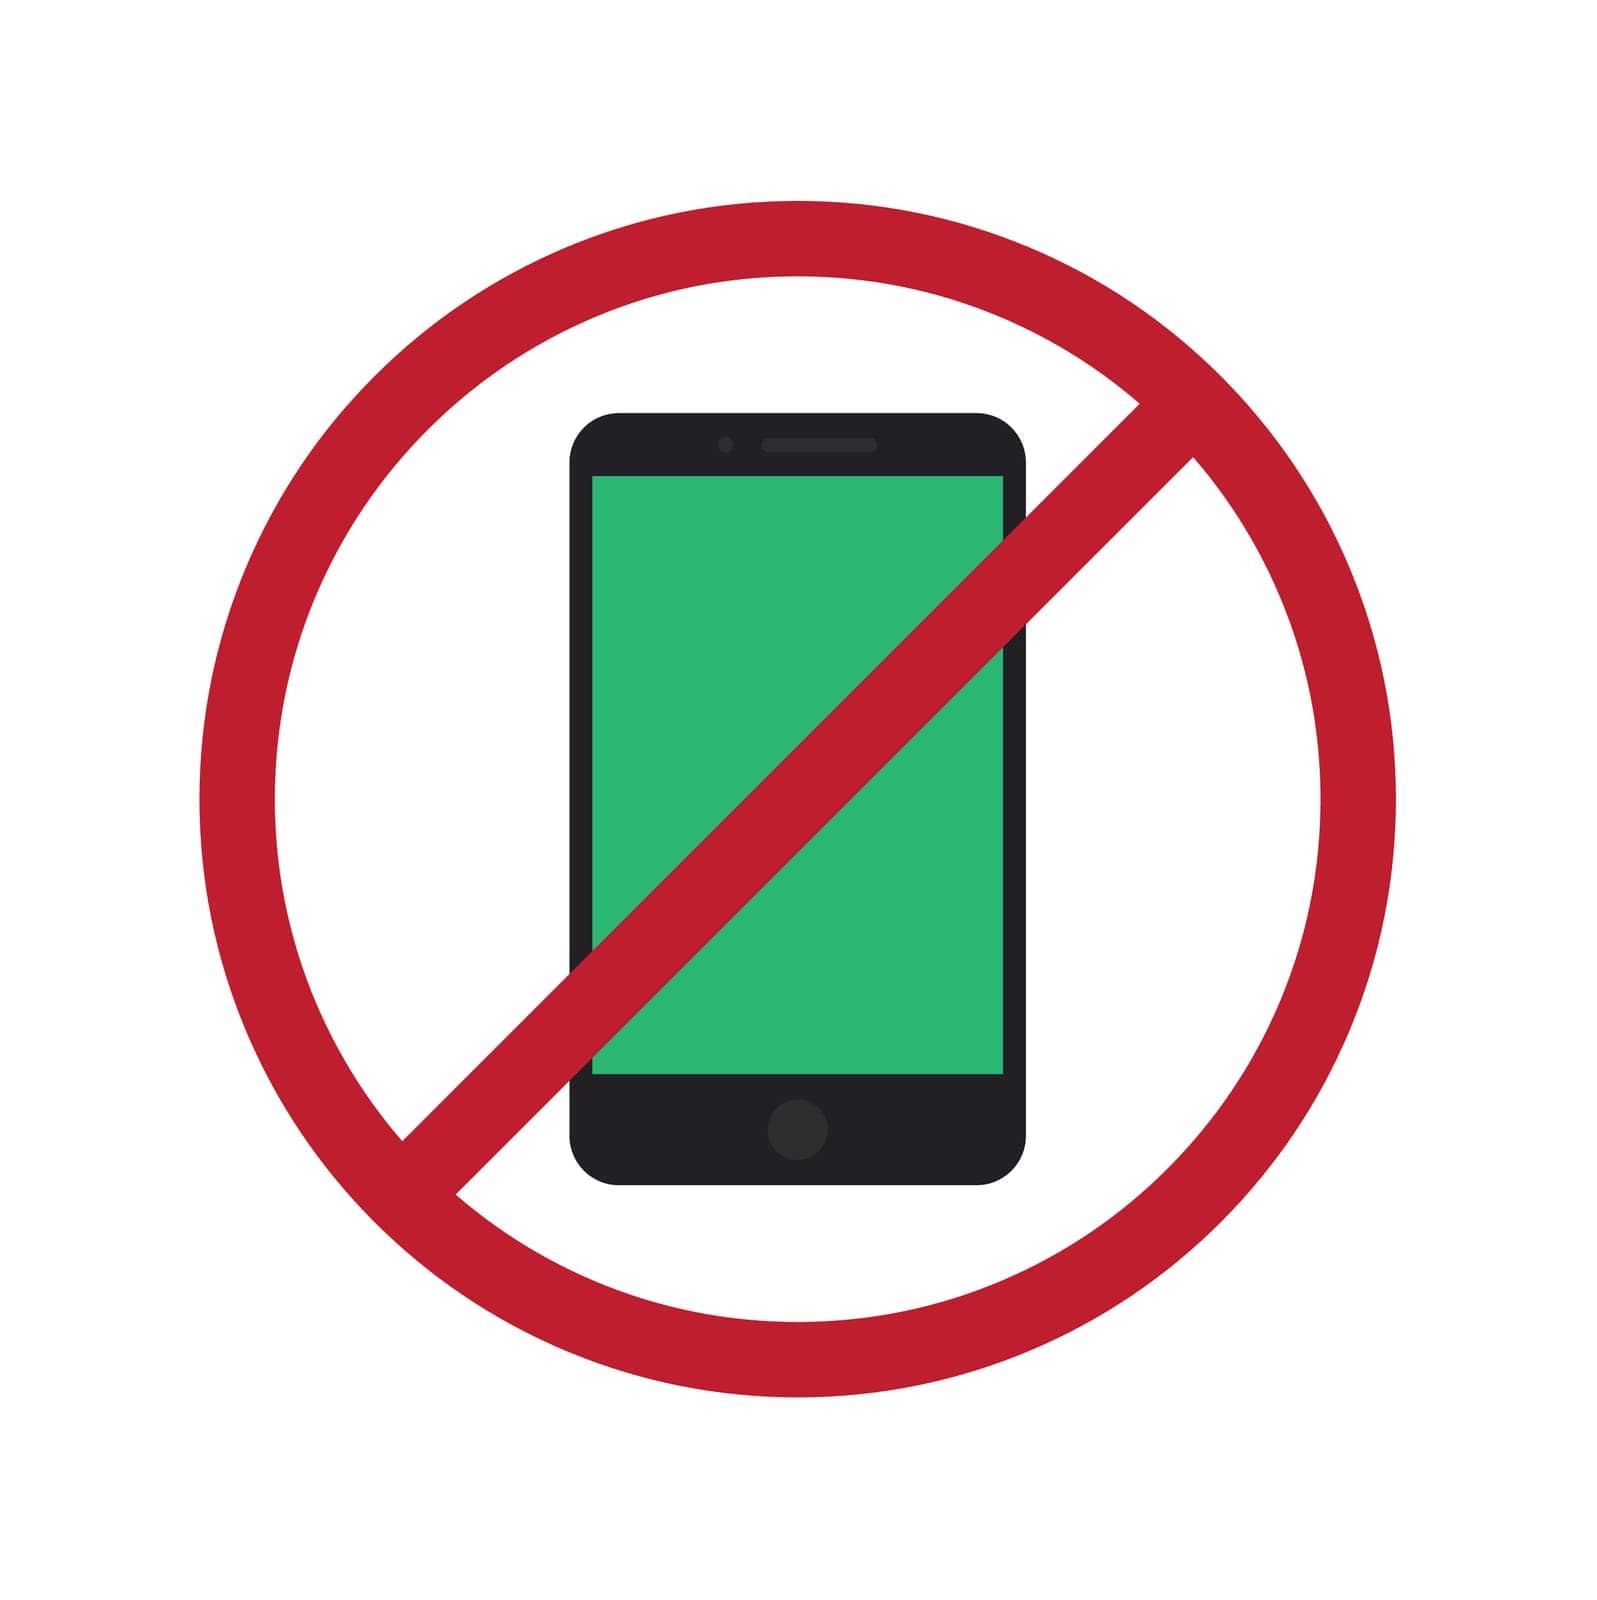 Phone Not Allowed icon vector image. by ICONBUNNY